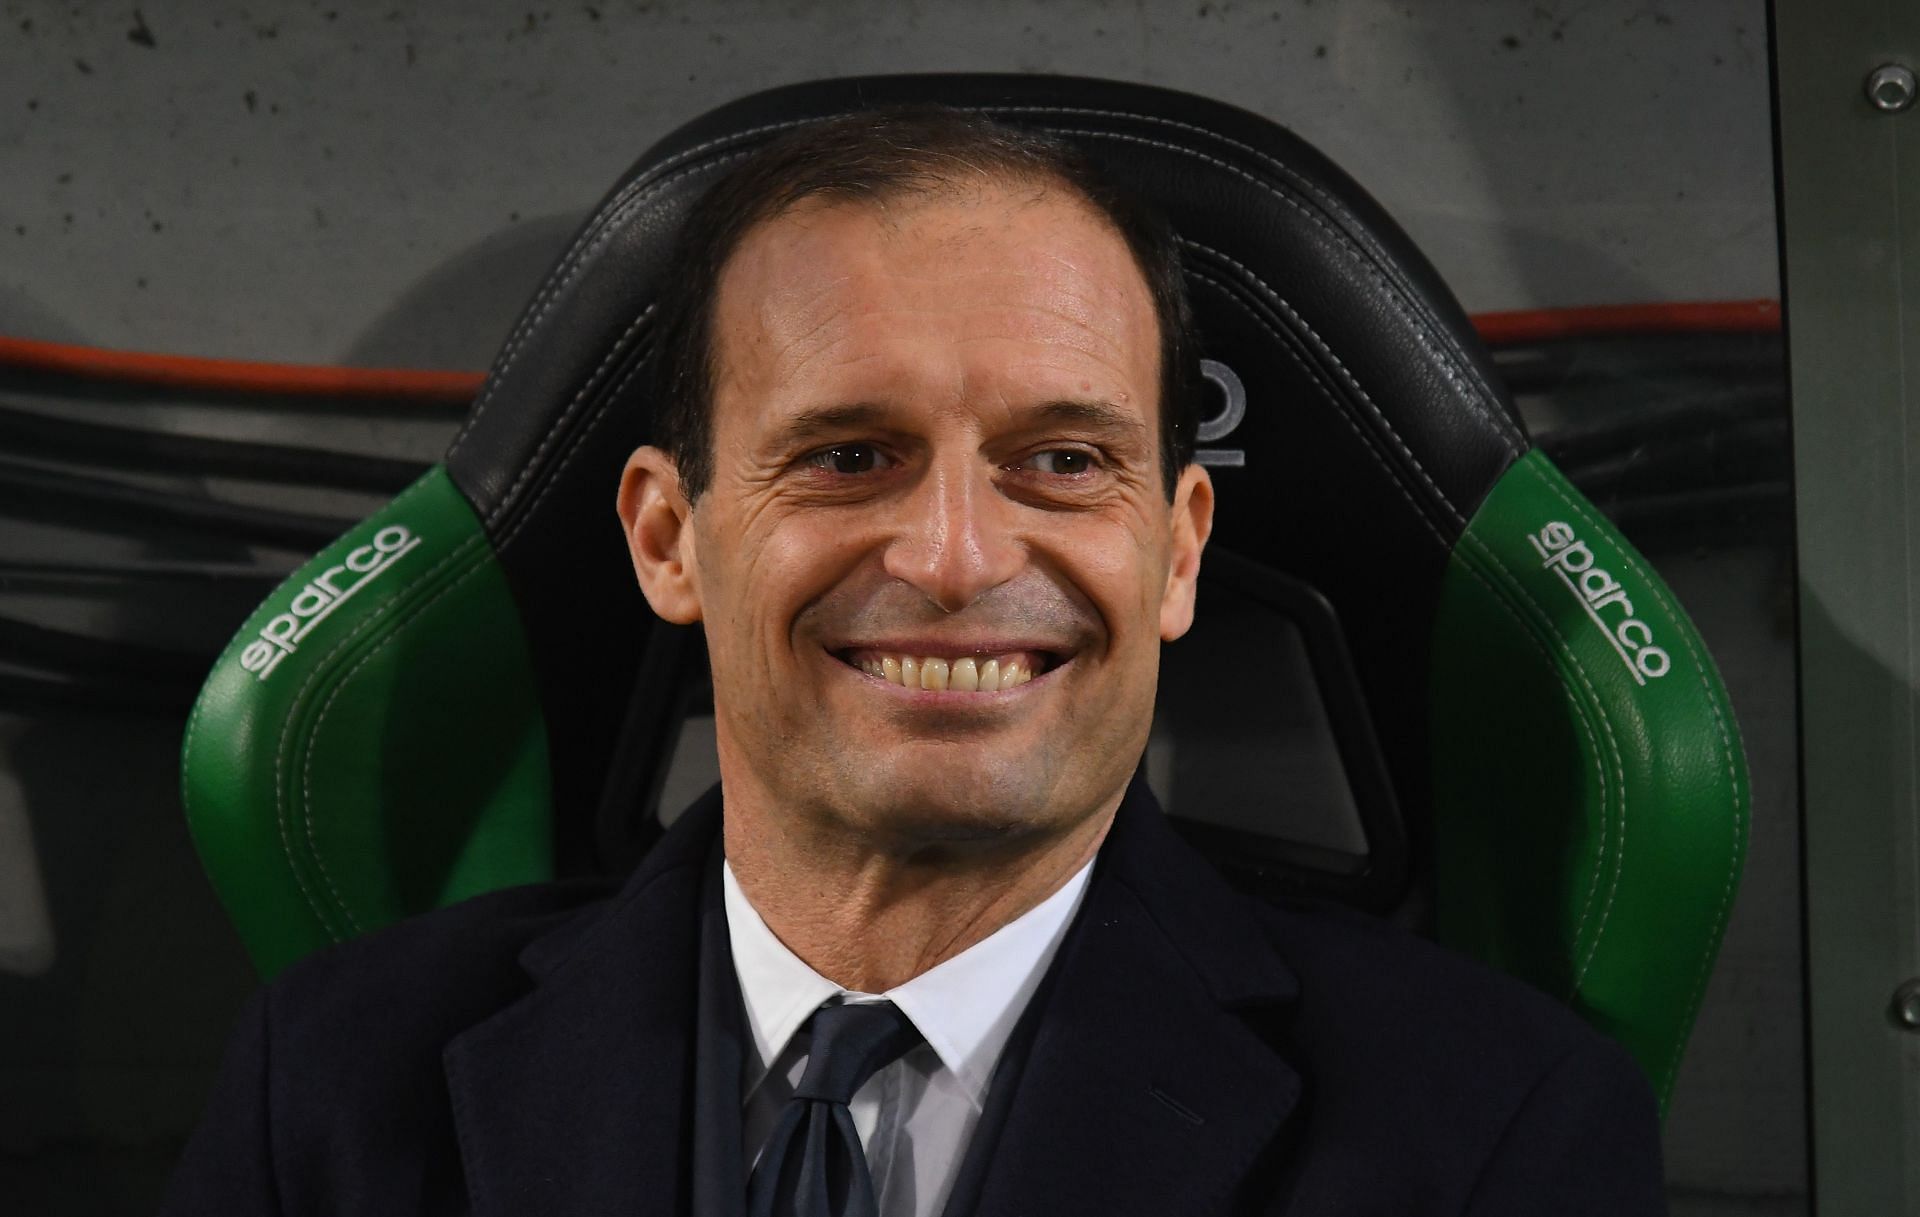 Massimiliano Allegri is one of the most successful Italian managers in the game.